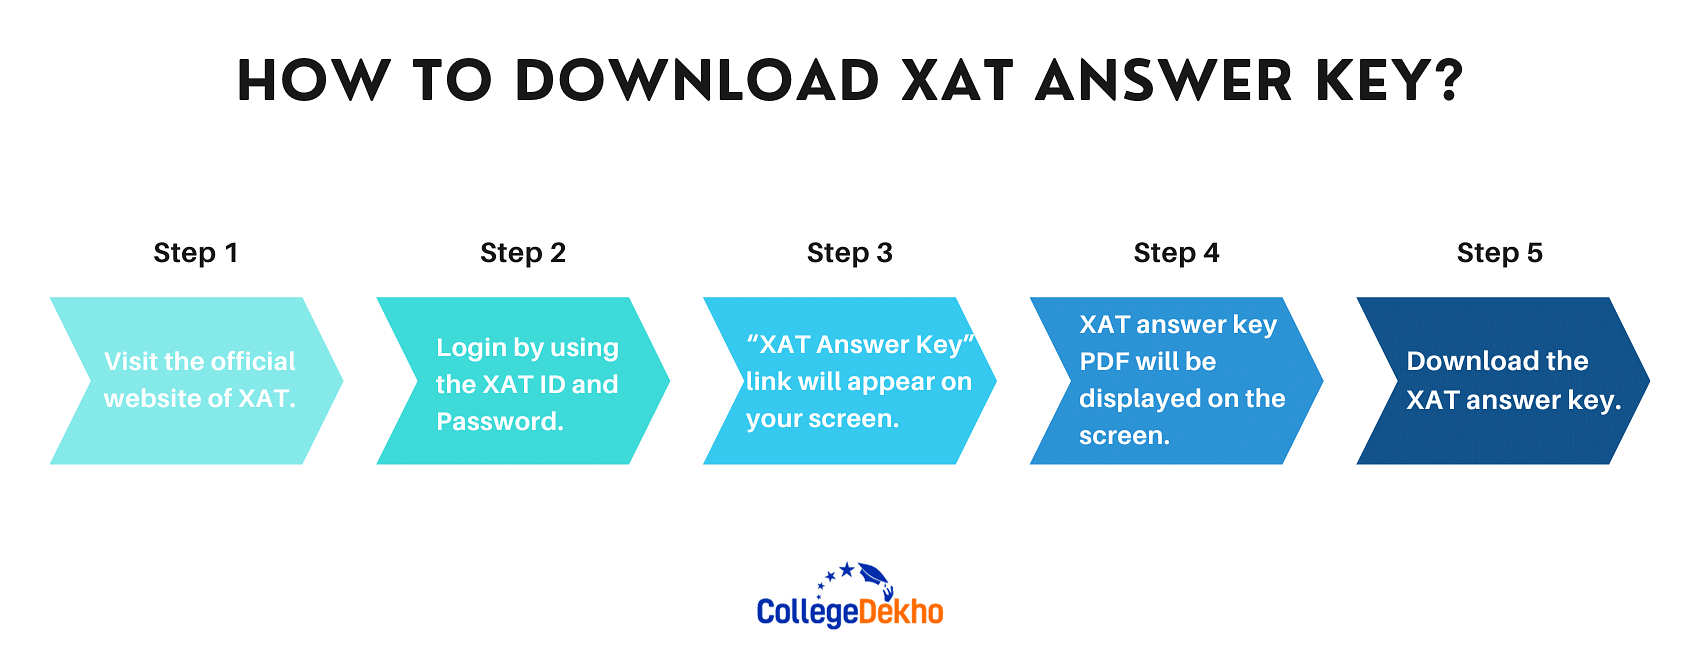 How to Download XAT Answer Key?